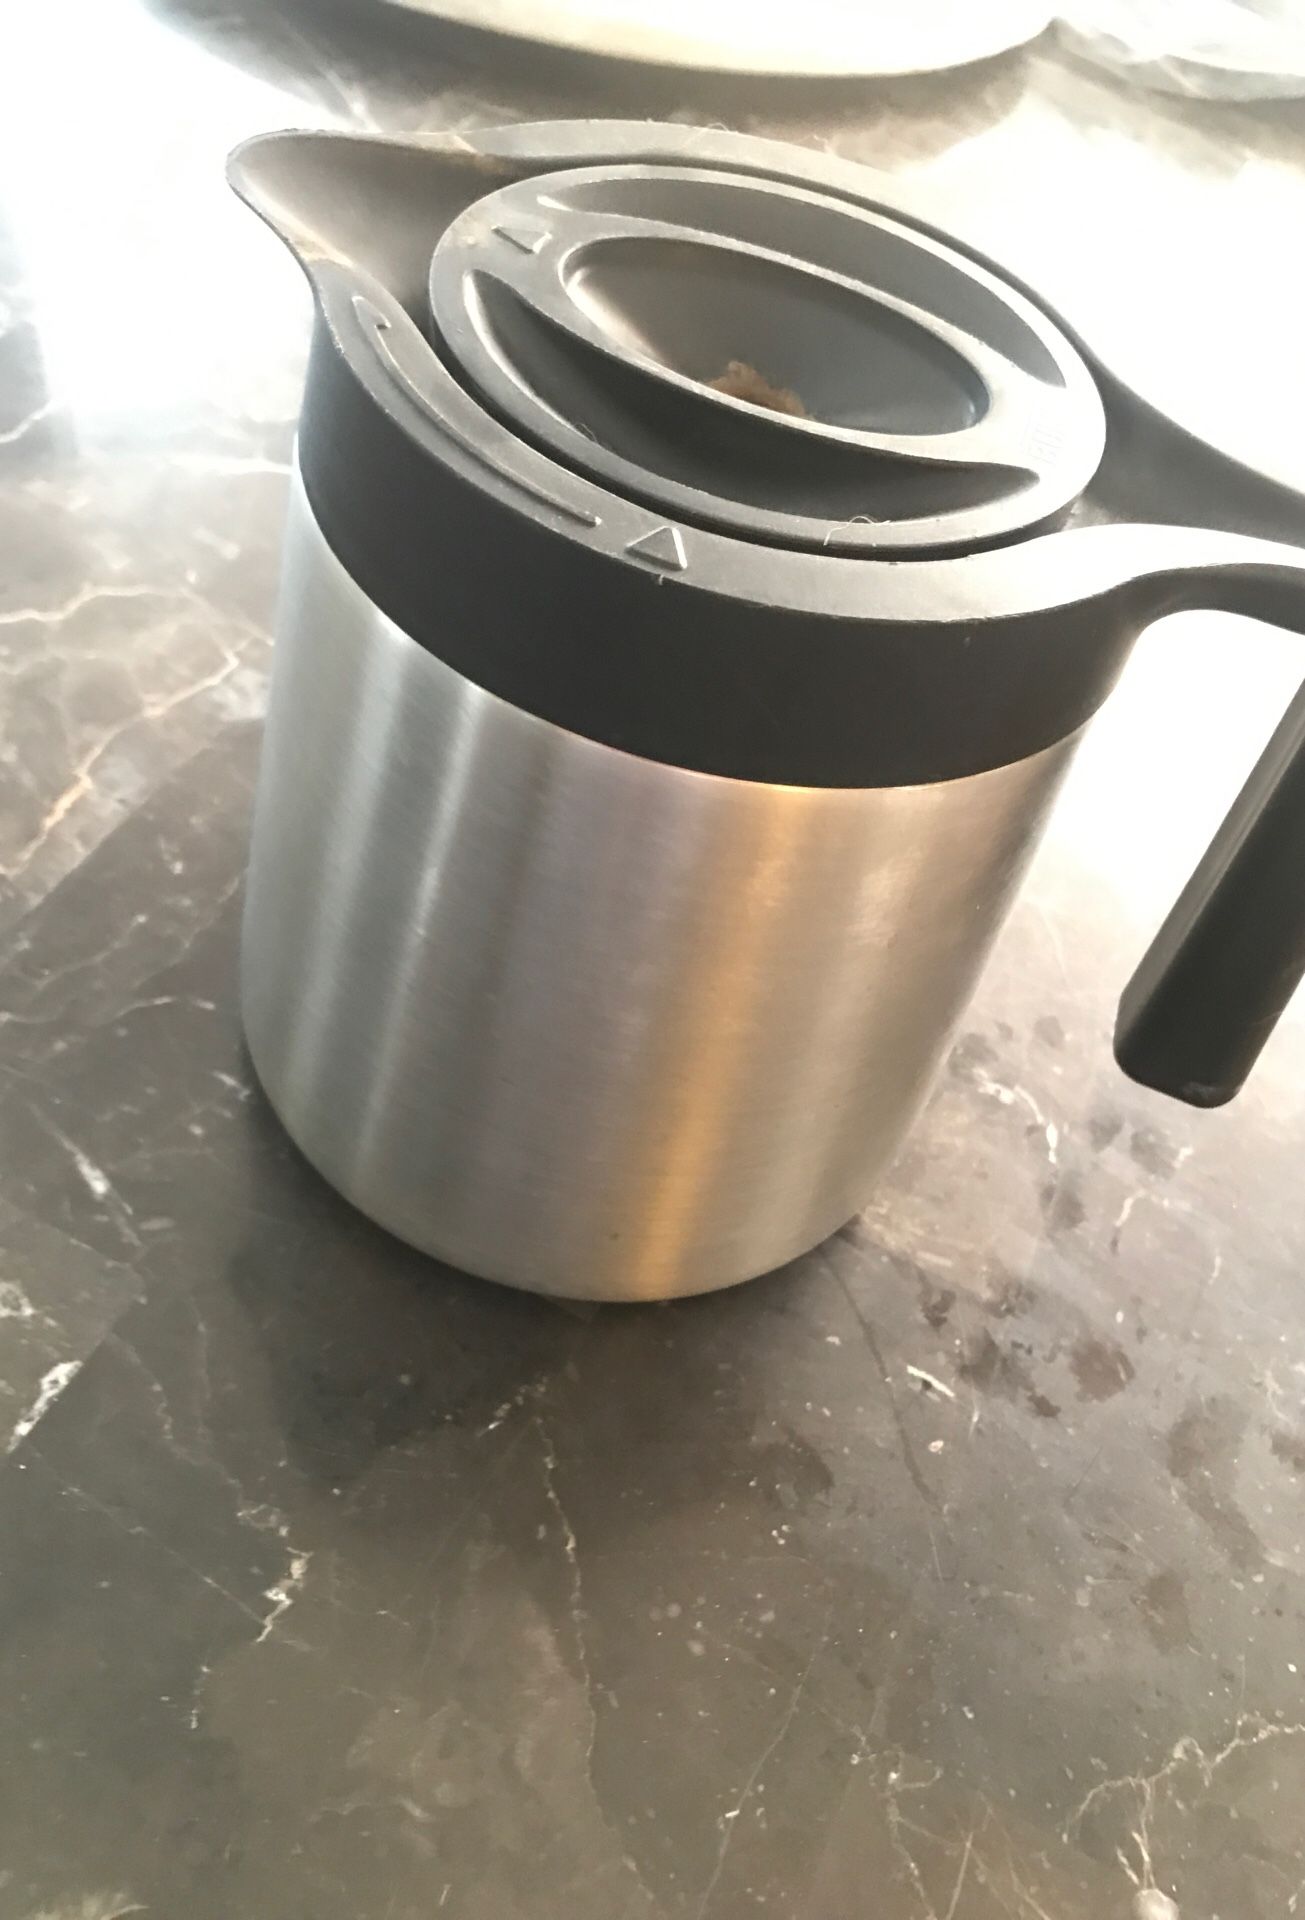 Stainless steel coffee carafe for motor home or camping